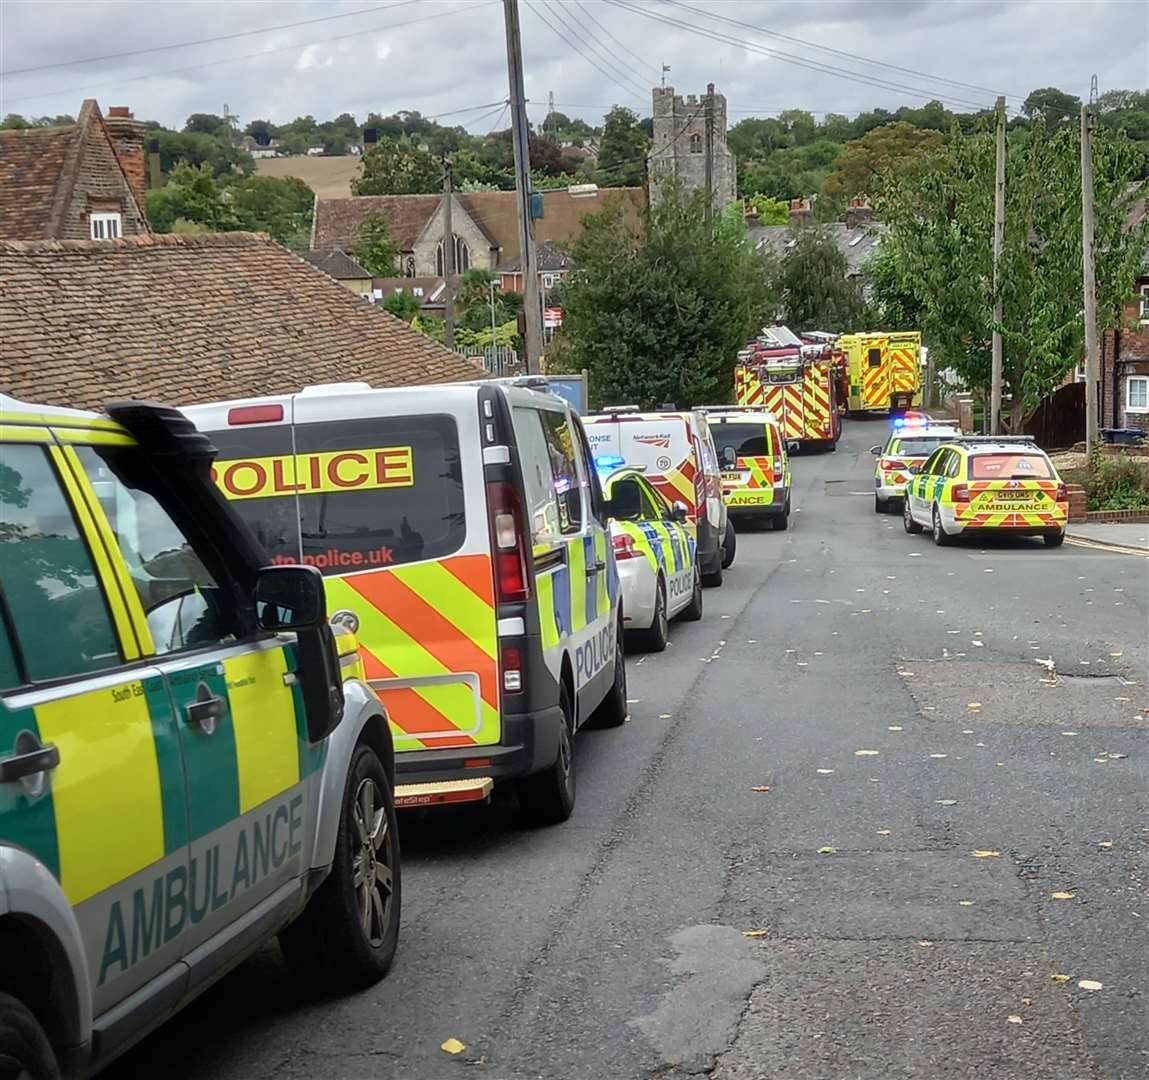 Chartham villagers say they have "never seen so many emergency vehicles" in one place